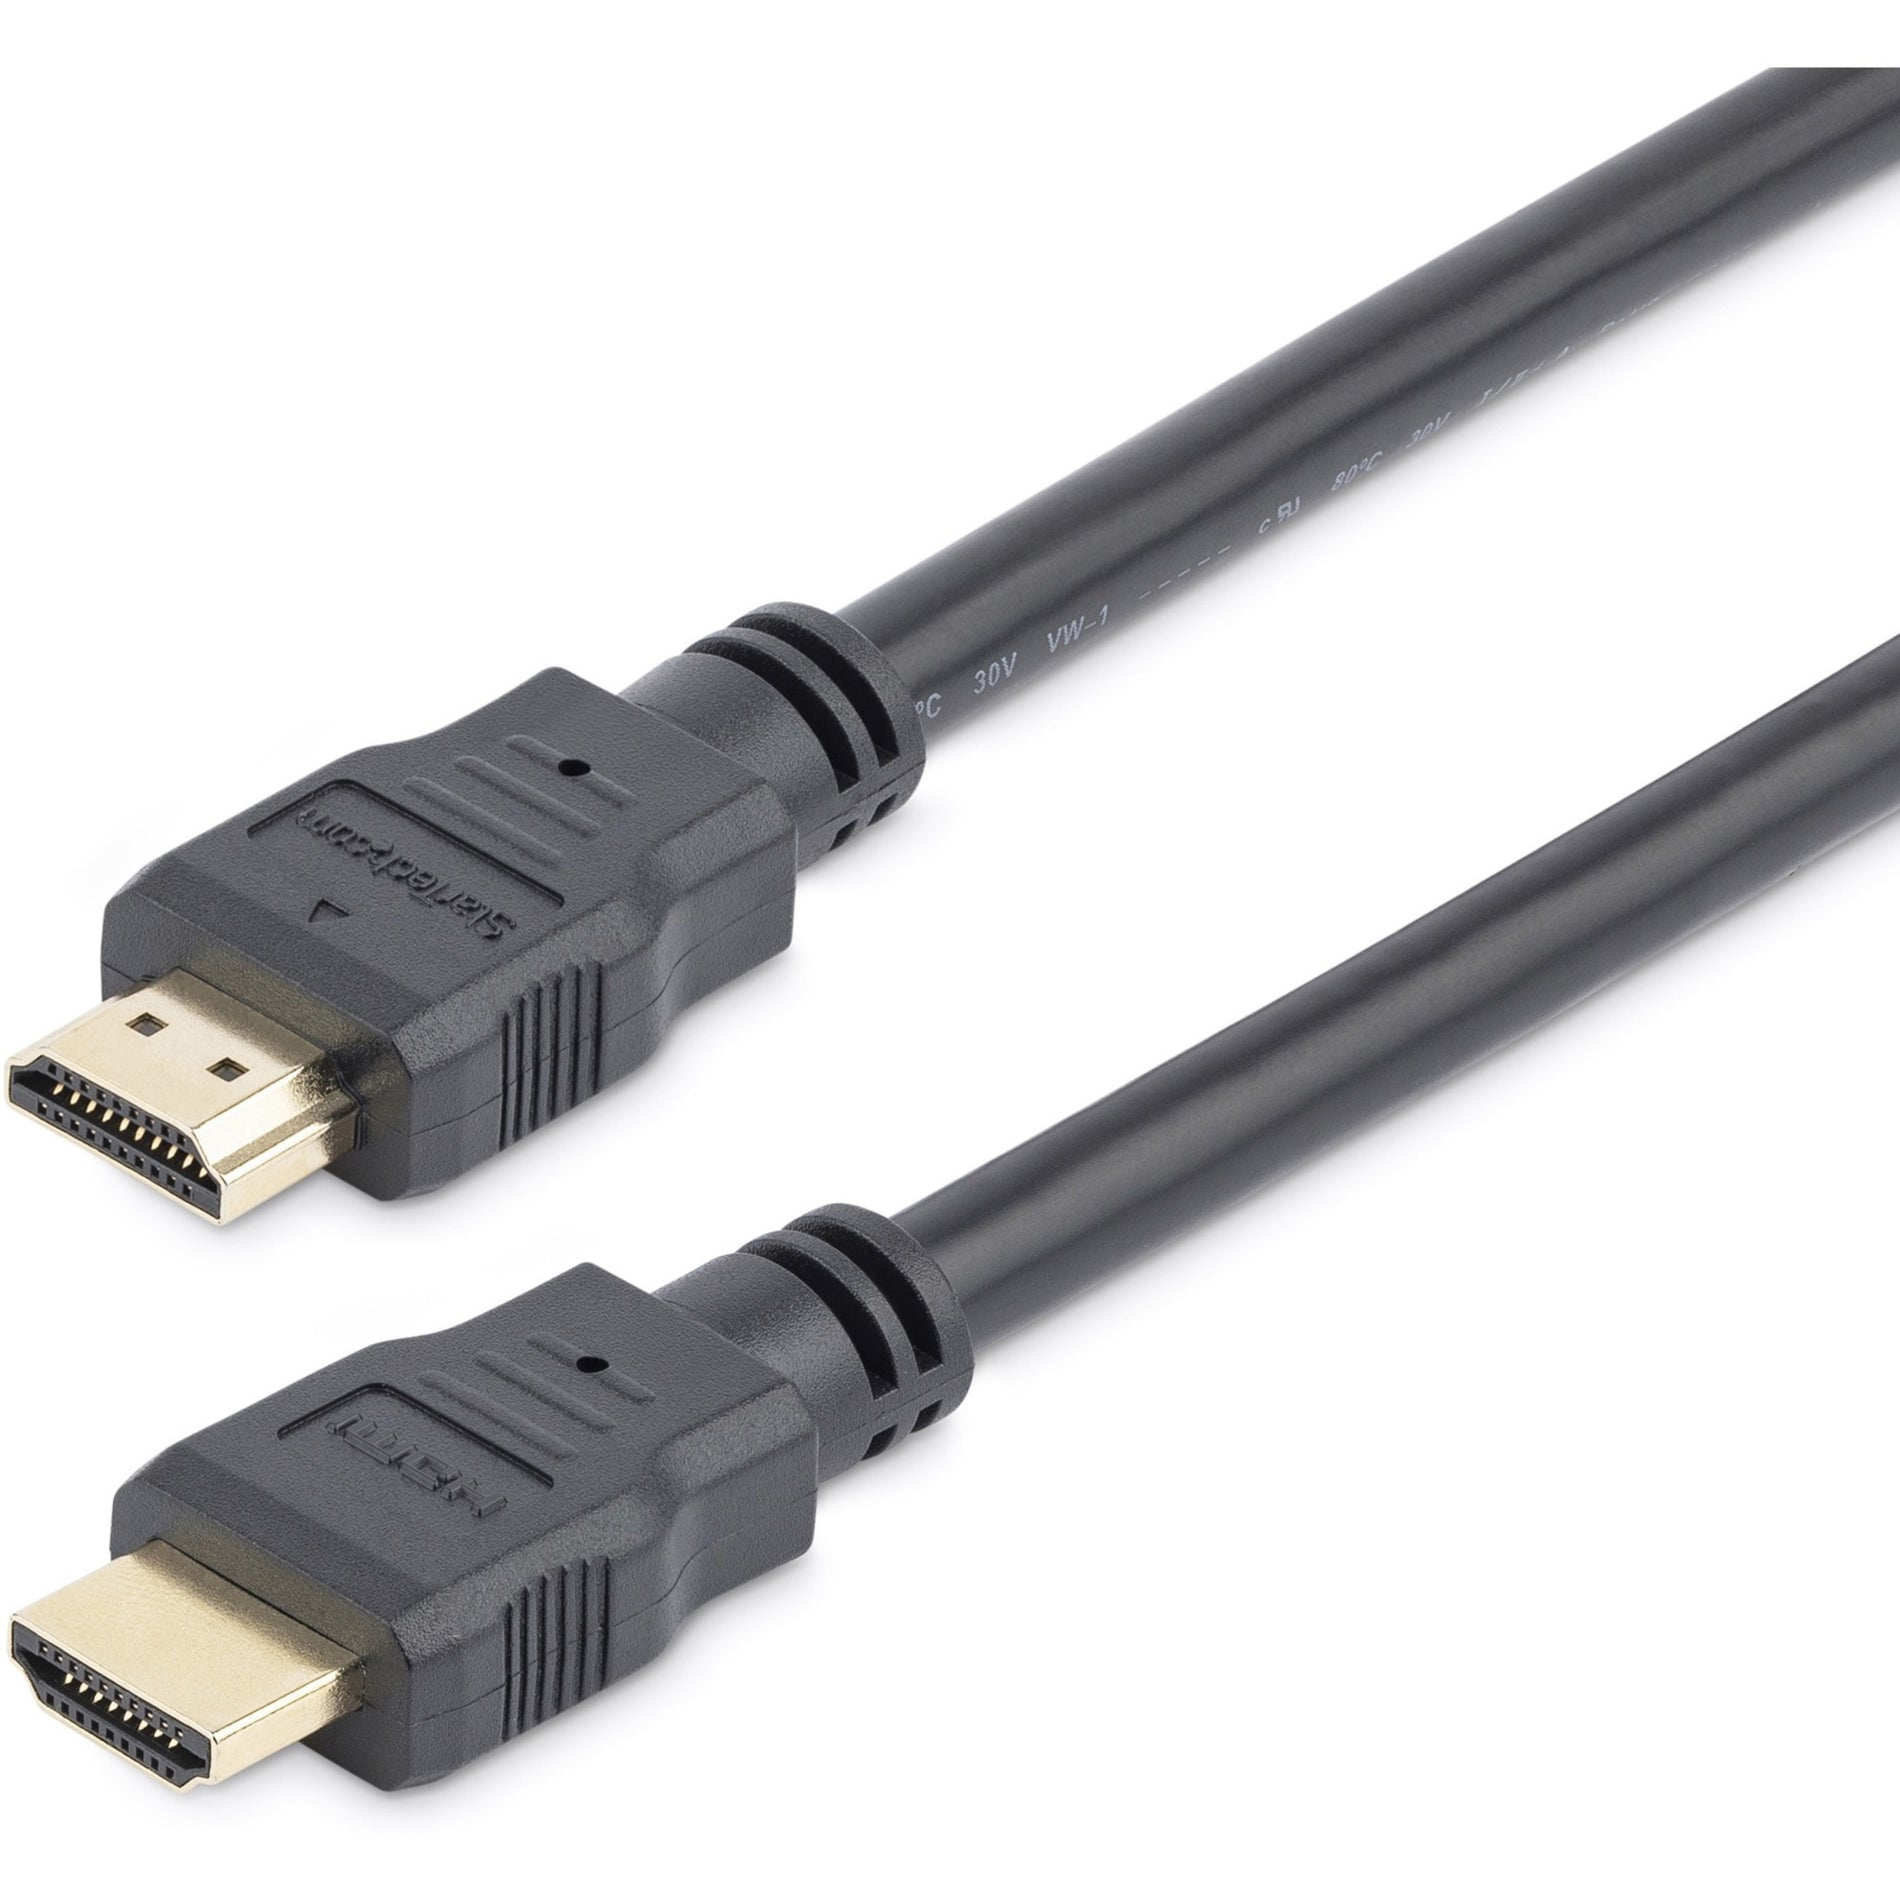 StarTech.com HDMM6 6 ft High Speed HDMI Cable - Ultra HD 4k x 2k HDMI Cable, Molded, Strain Relief, Corrosion-free, Gold Plated Connectors